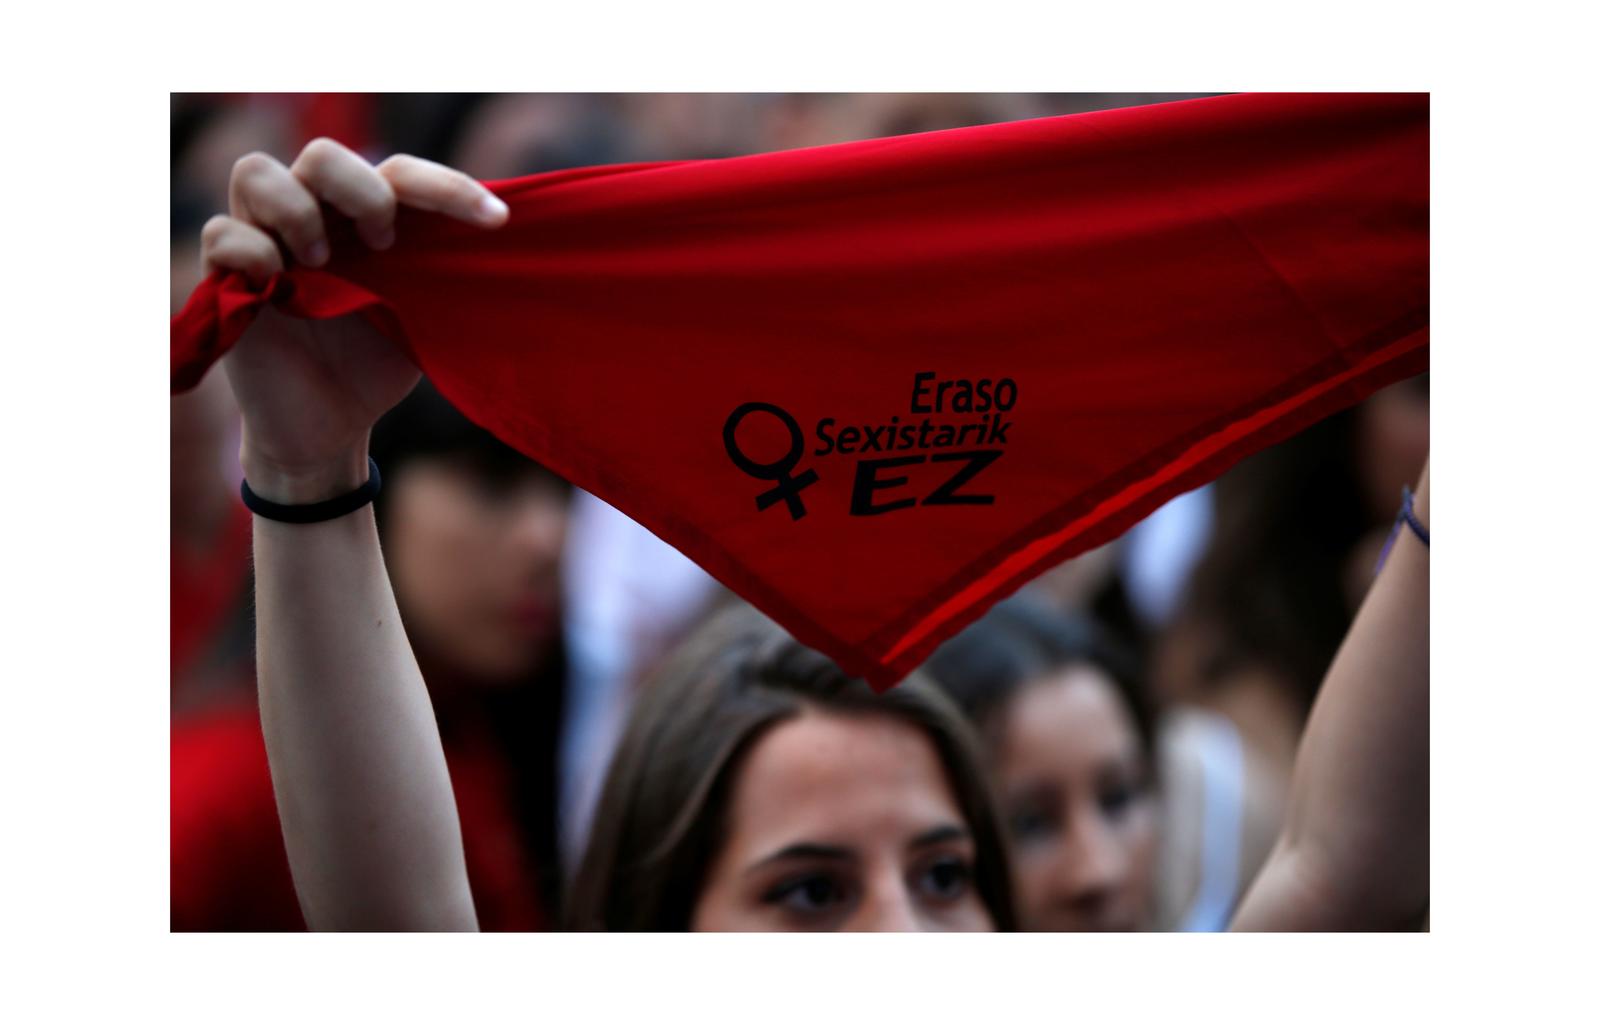 A woman holds a San Fermin red scarf with the phrase “No to sexual aggressions” during a protest against sexual violence against women during the San Fermin festival in Pamplona